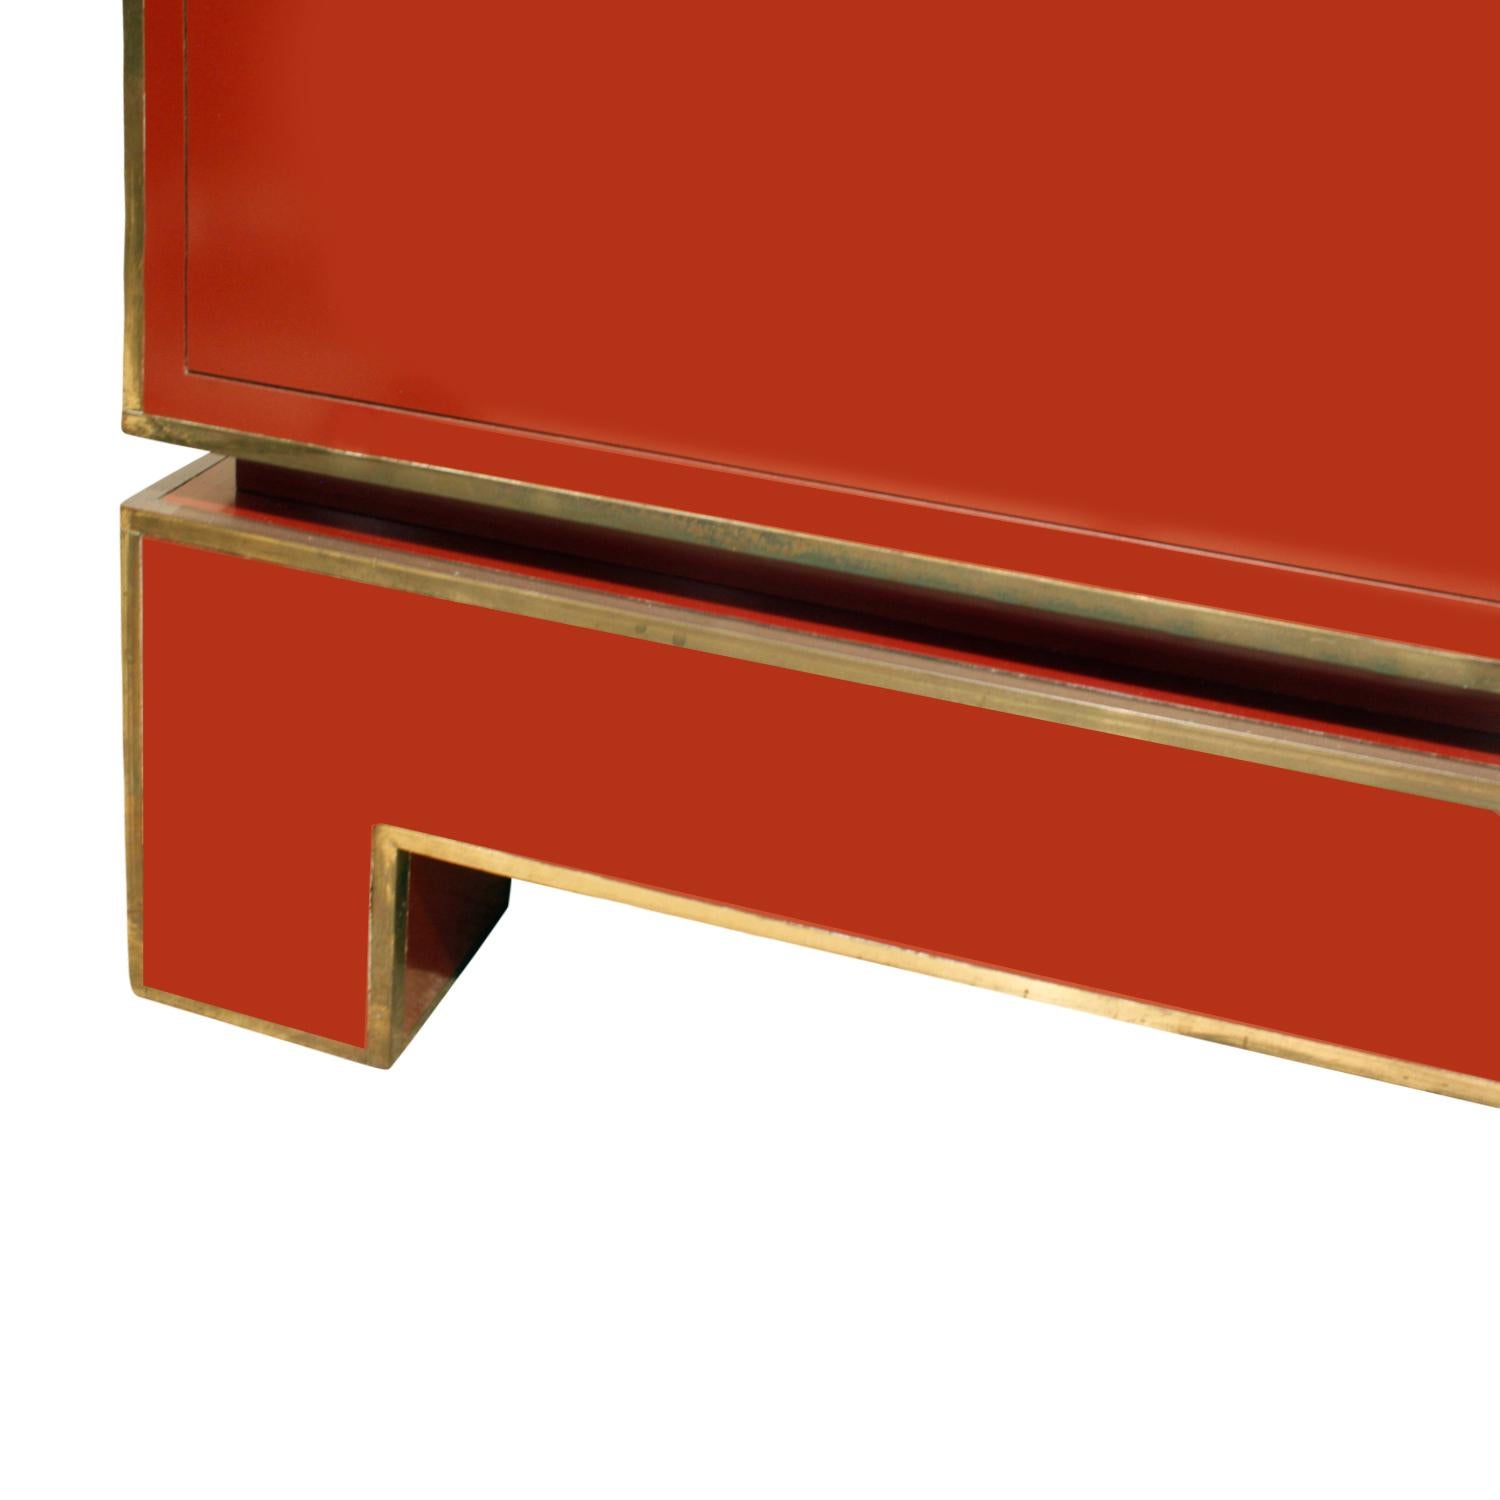 Hand-Crafted Alain Delon Chic Red Credenza with Brass Trim, 1970s ‘Signed’